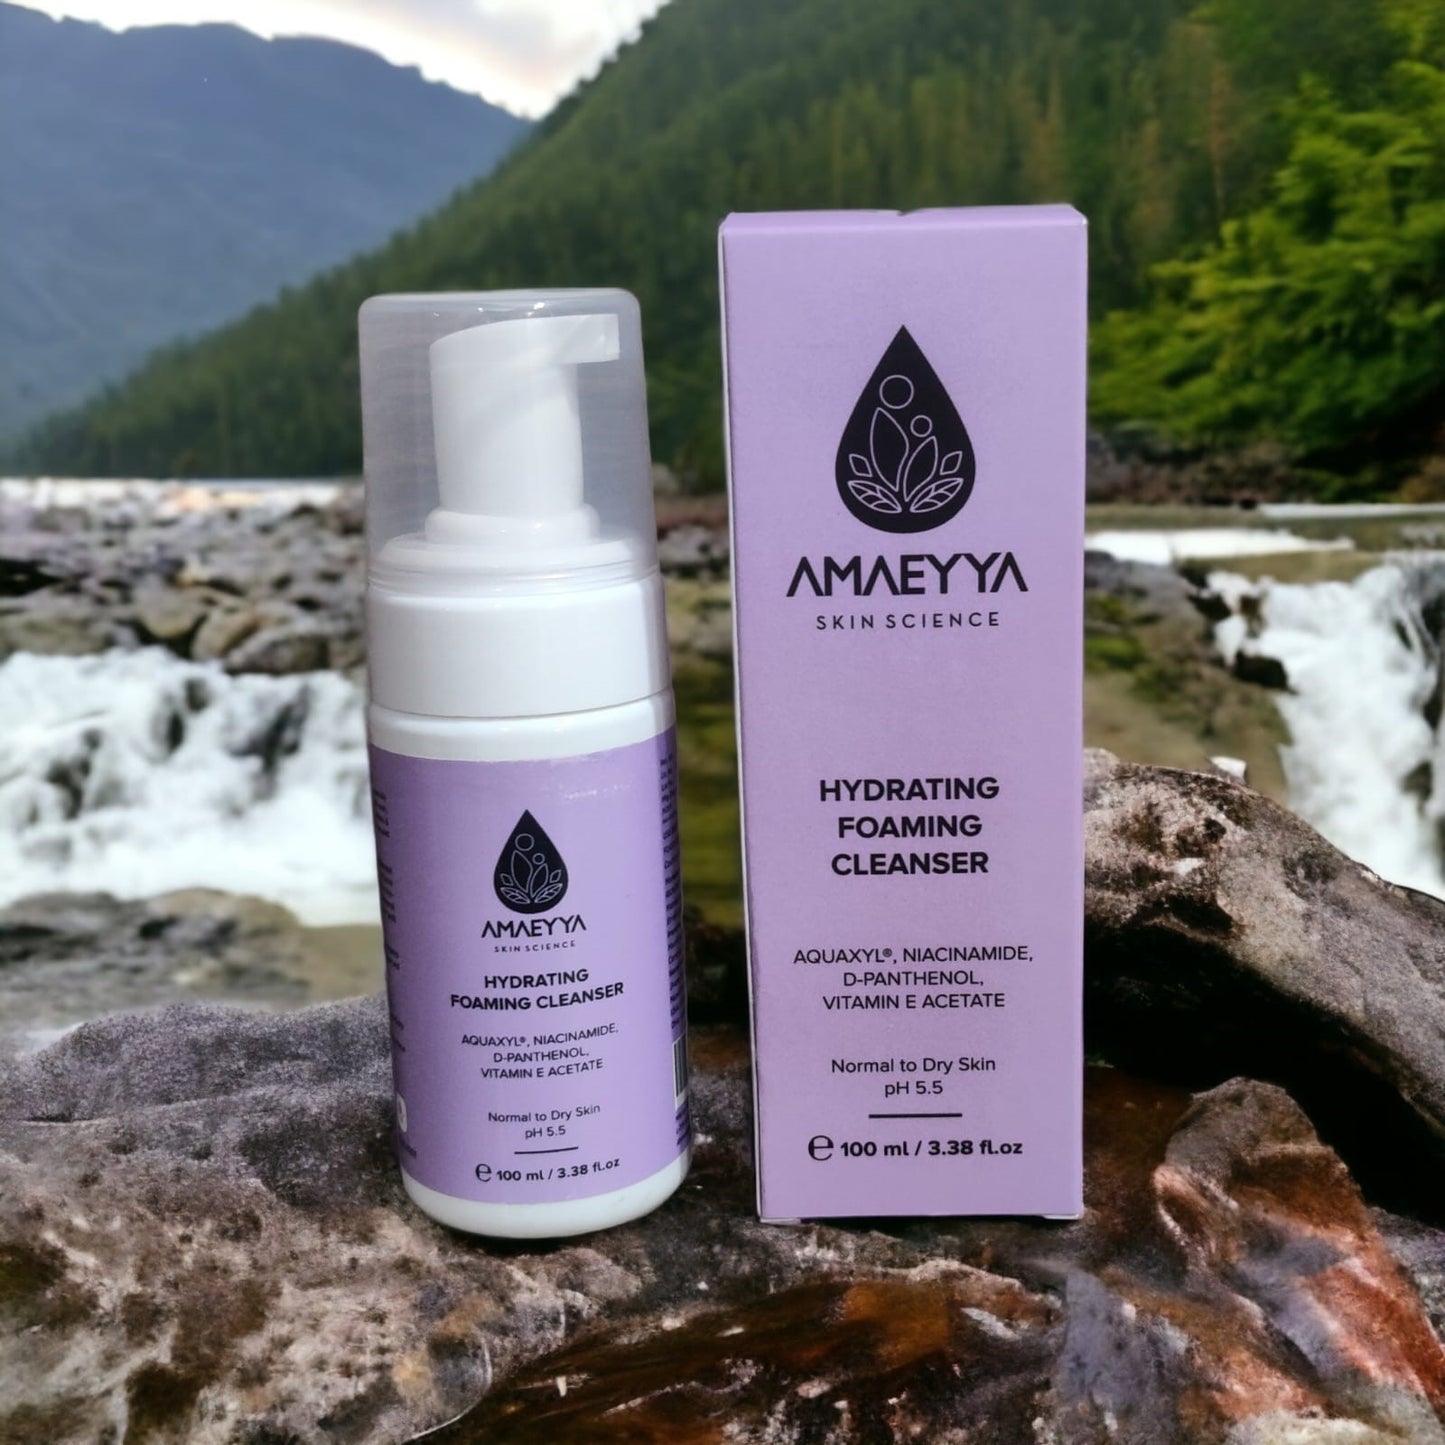 AMAEYYA Hydrating Foaming Cleanser with Aquaxyl, Niacinamide, D-Panthenol & Vitamin E for Normal to Dry Skin, pH 5.5